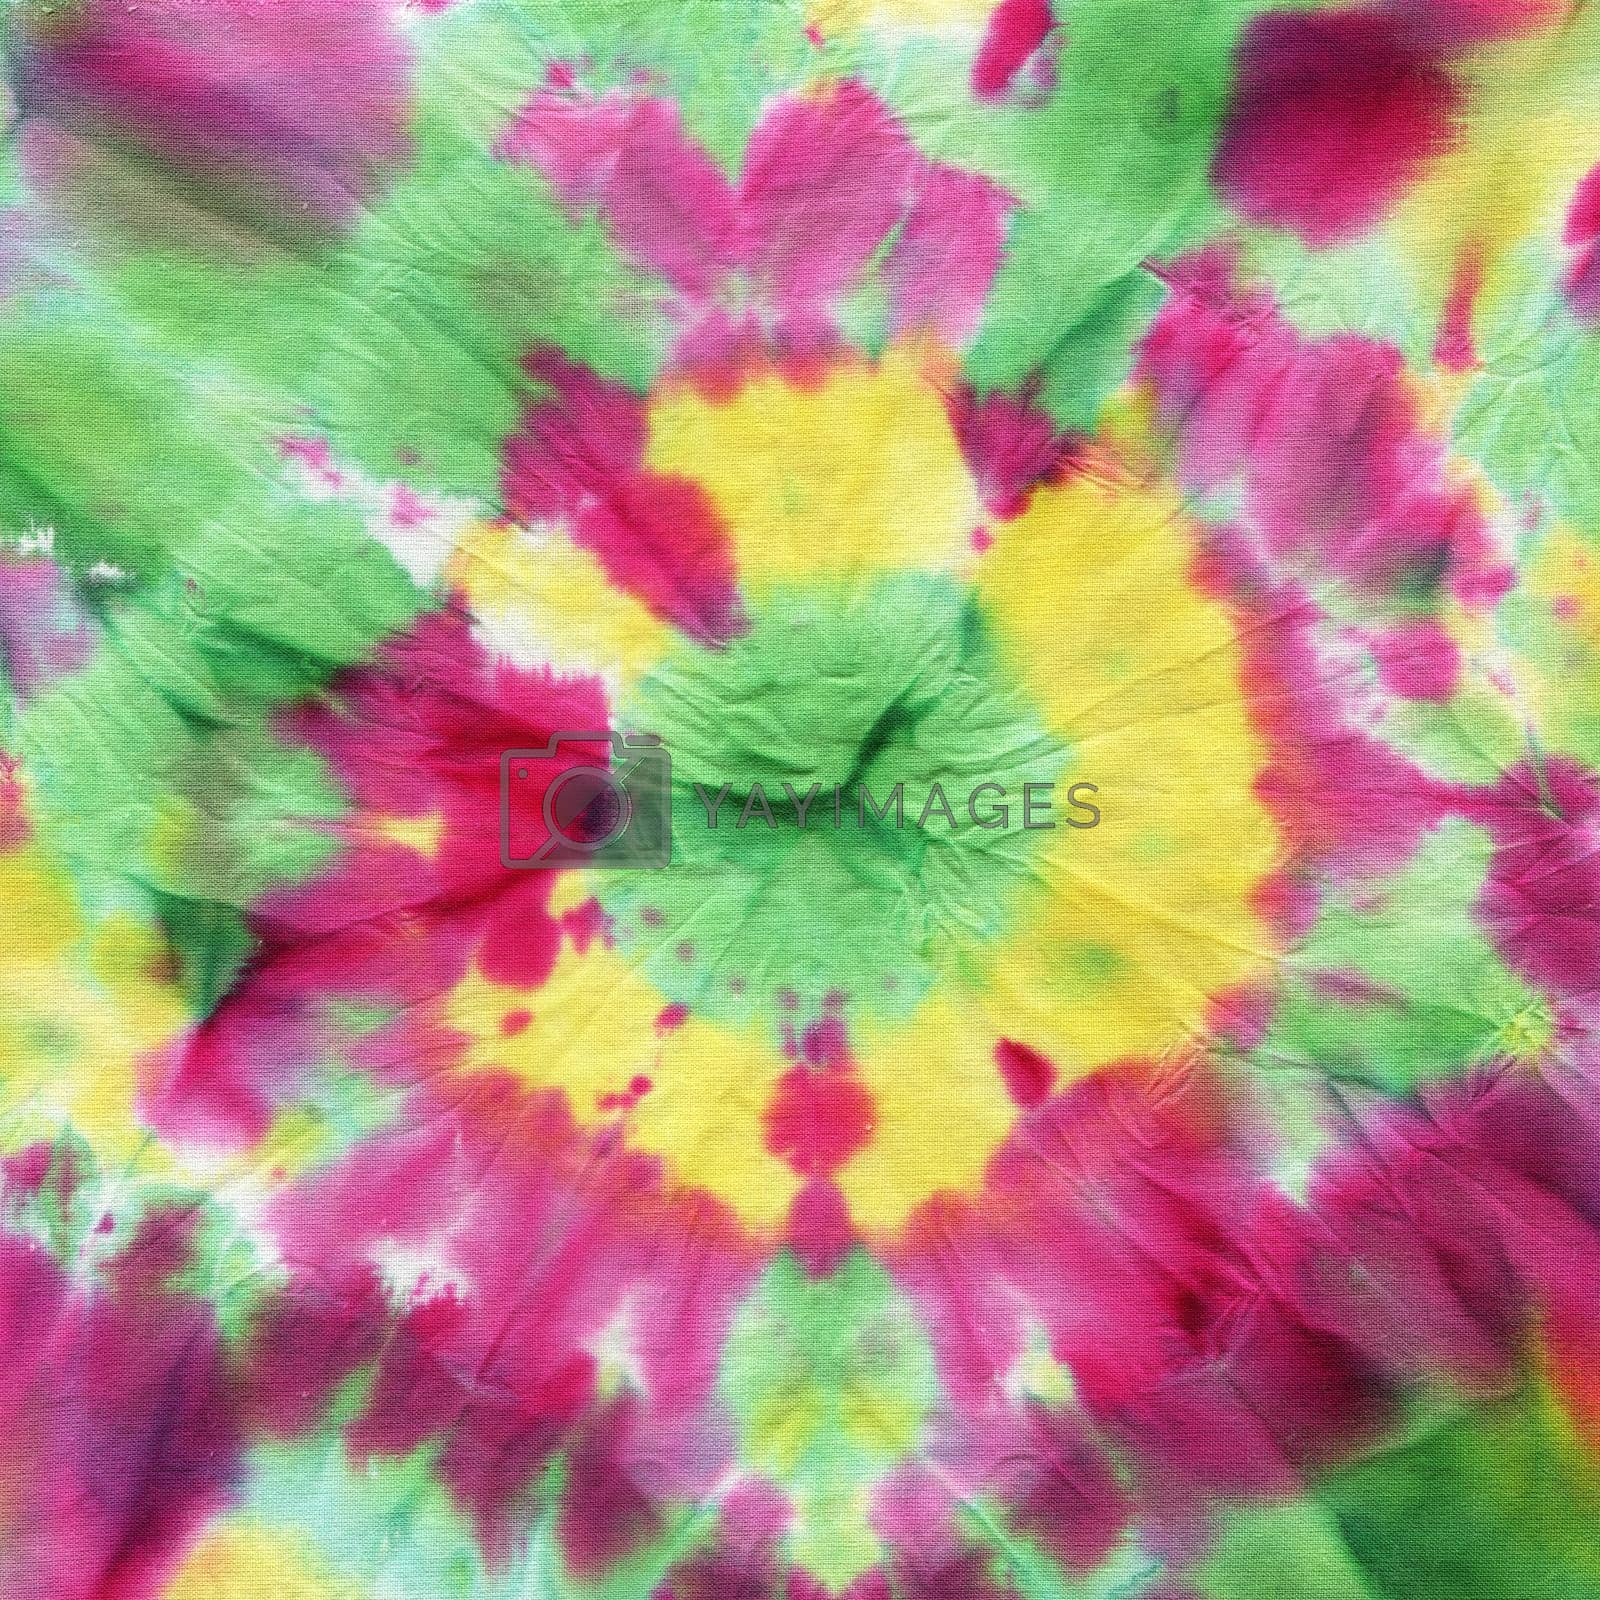 Royalty free image of Tie dyed pattern on cotton fabric for background. by NataOmsk